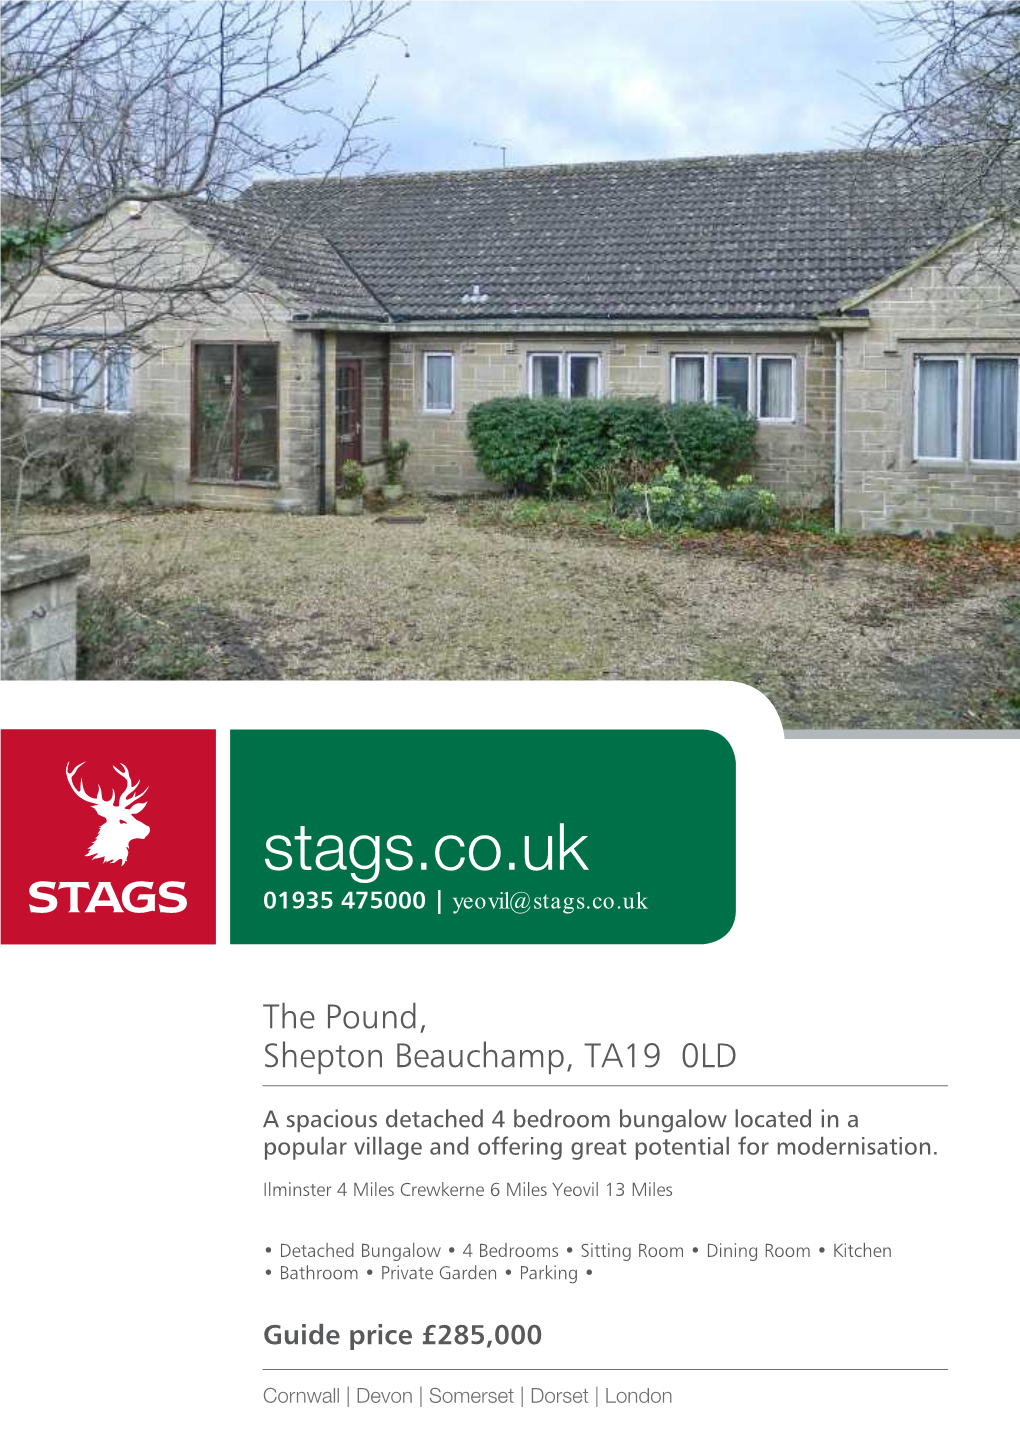 Stags.Co.Uk 01935 475000 | Yeovil@Stags.Co.Uk